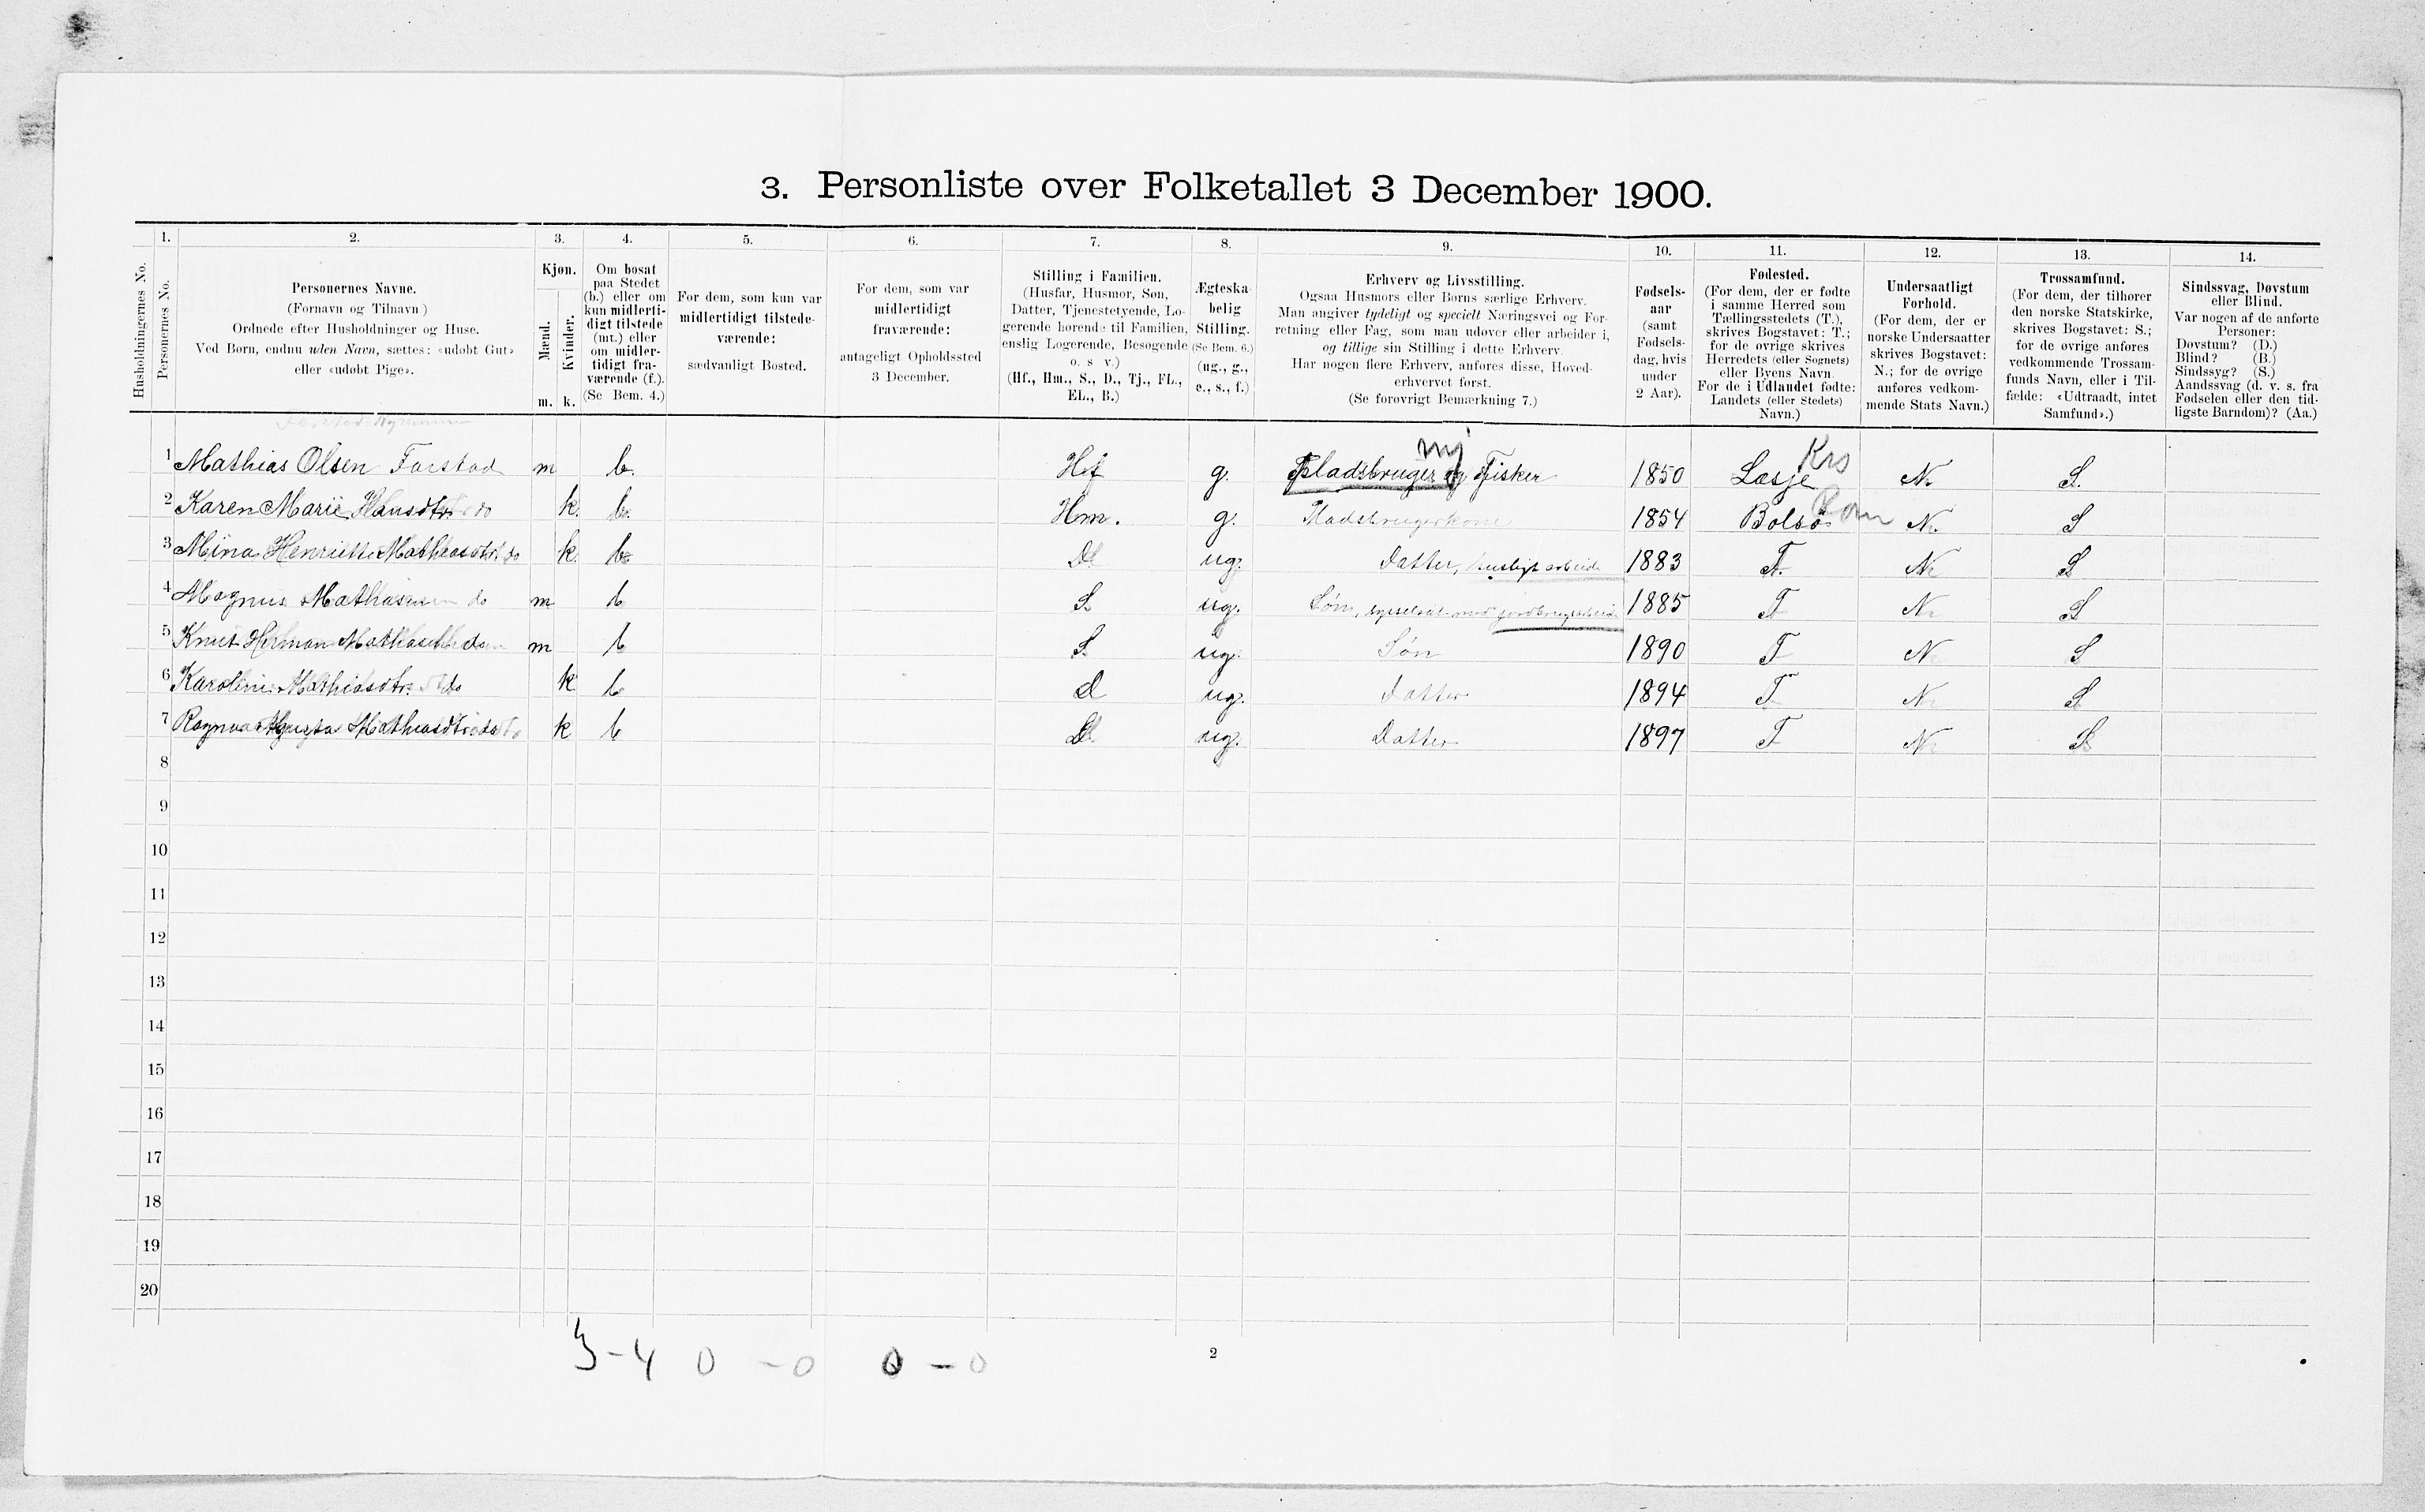 SAT, 1900 census for Bud, 1900, p. 605